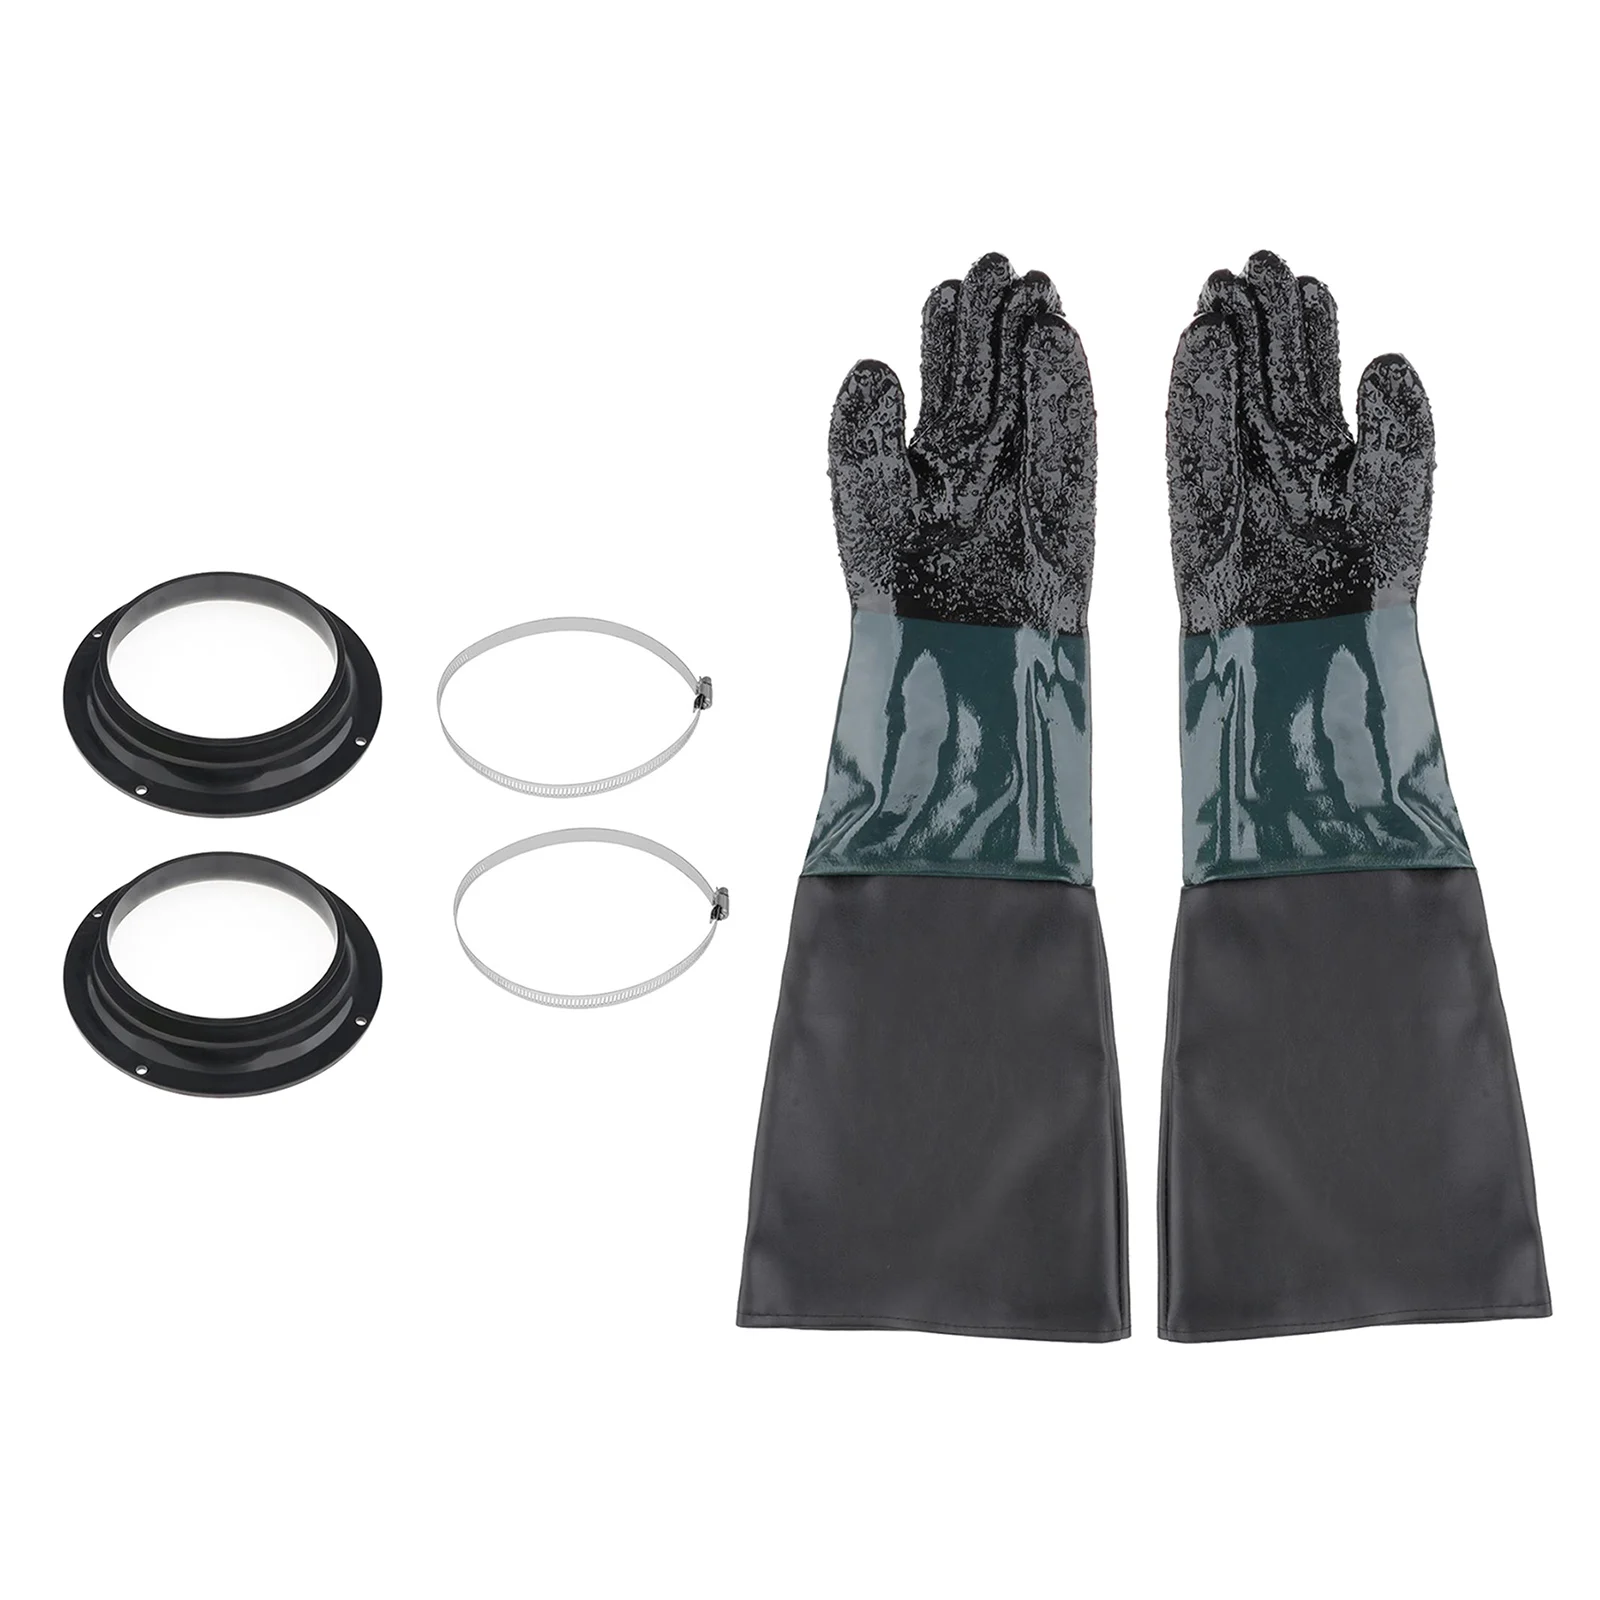 Details about   1 Pair of Heavy Duty Sandblast Gloves 2 Glove Holders & 2 Clamps for Sand 